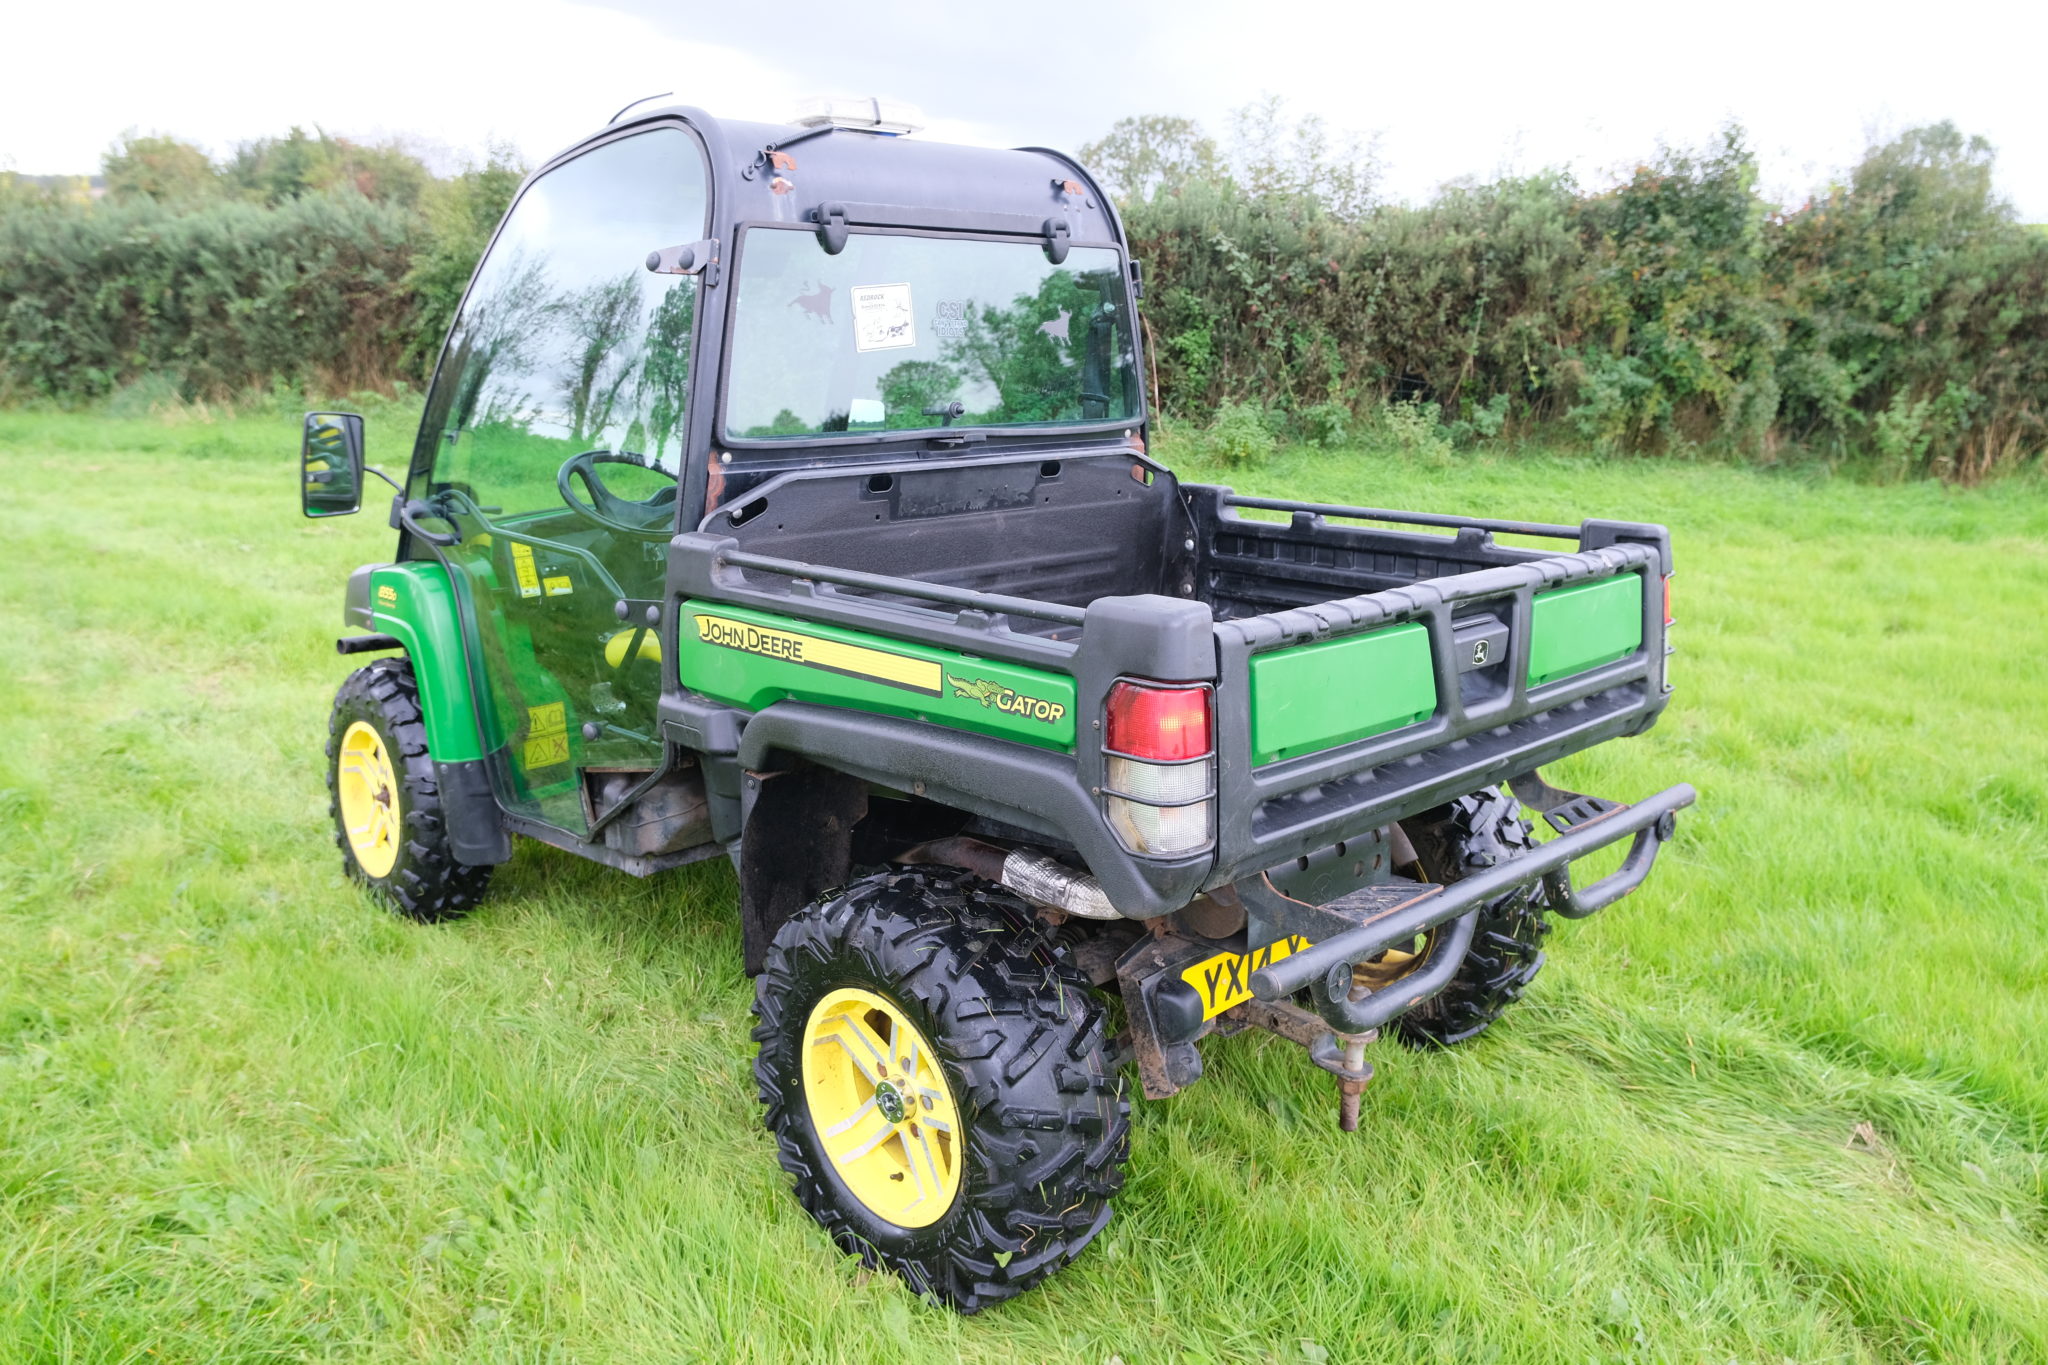 Win This 2014 Road Legal John Deere Gator 885D | Lucky Day Competitions